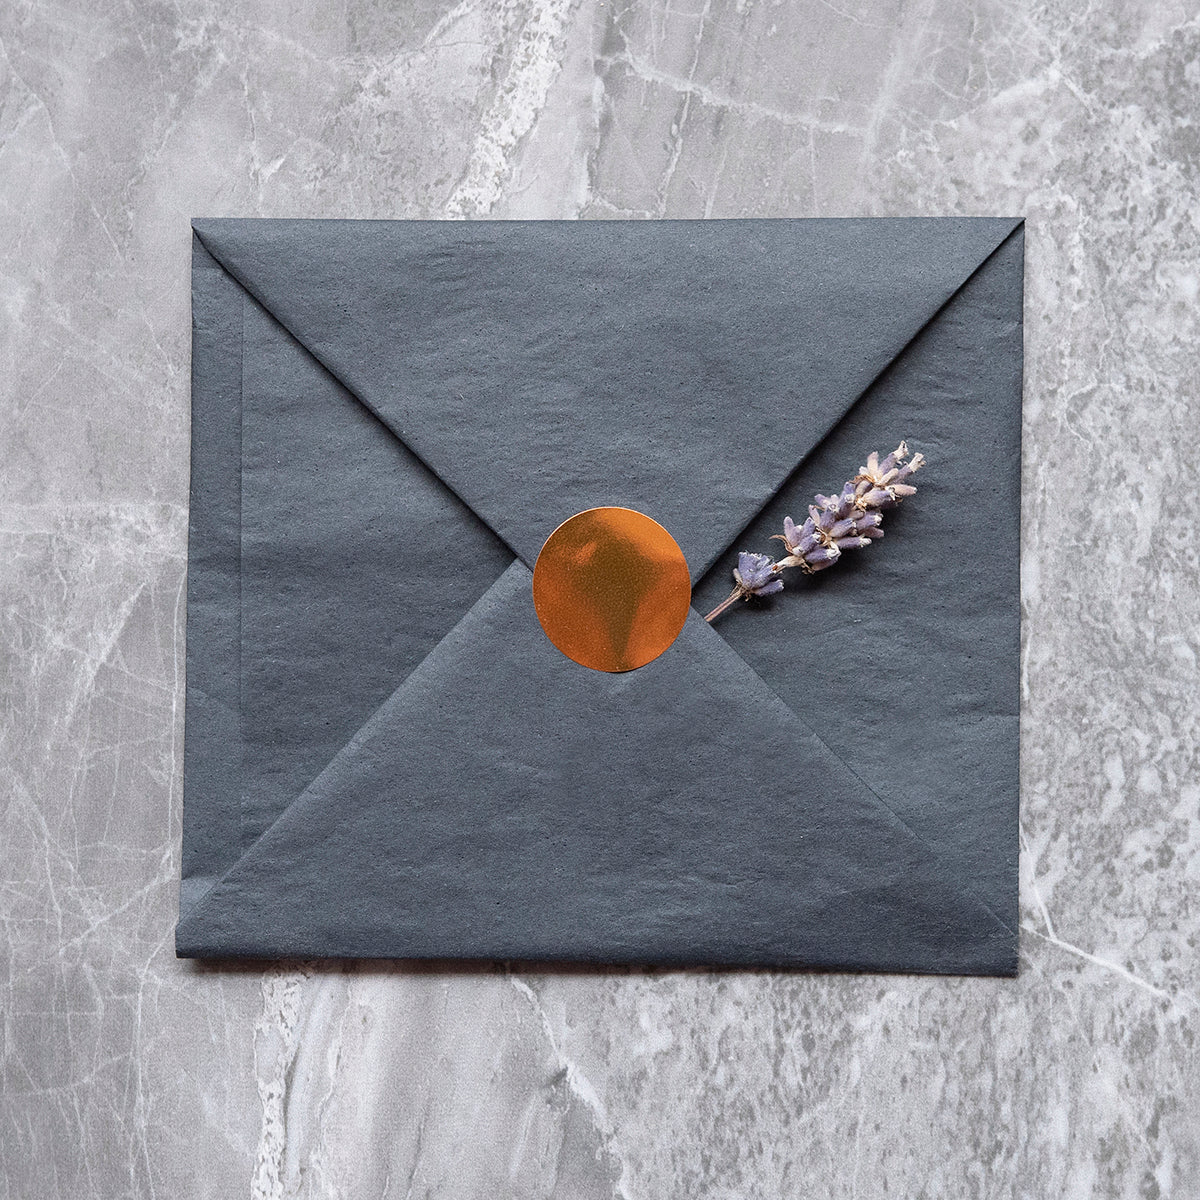 image of grey envelope for the facemask photographed on grey marble